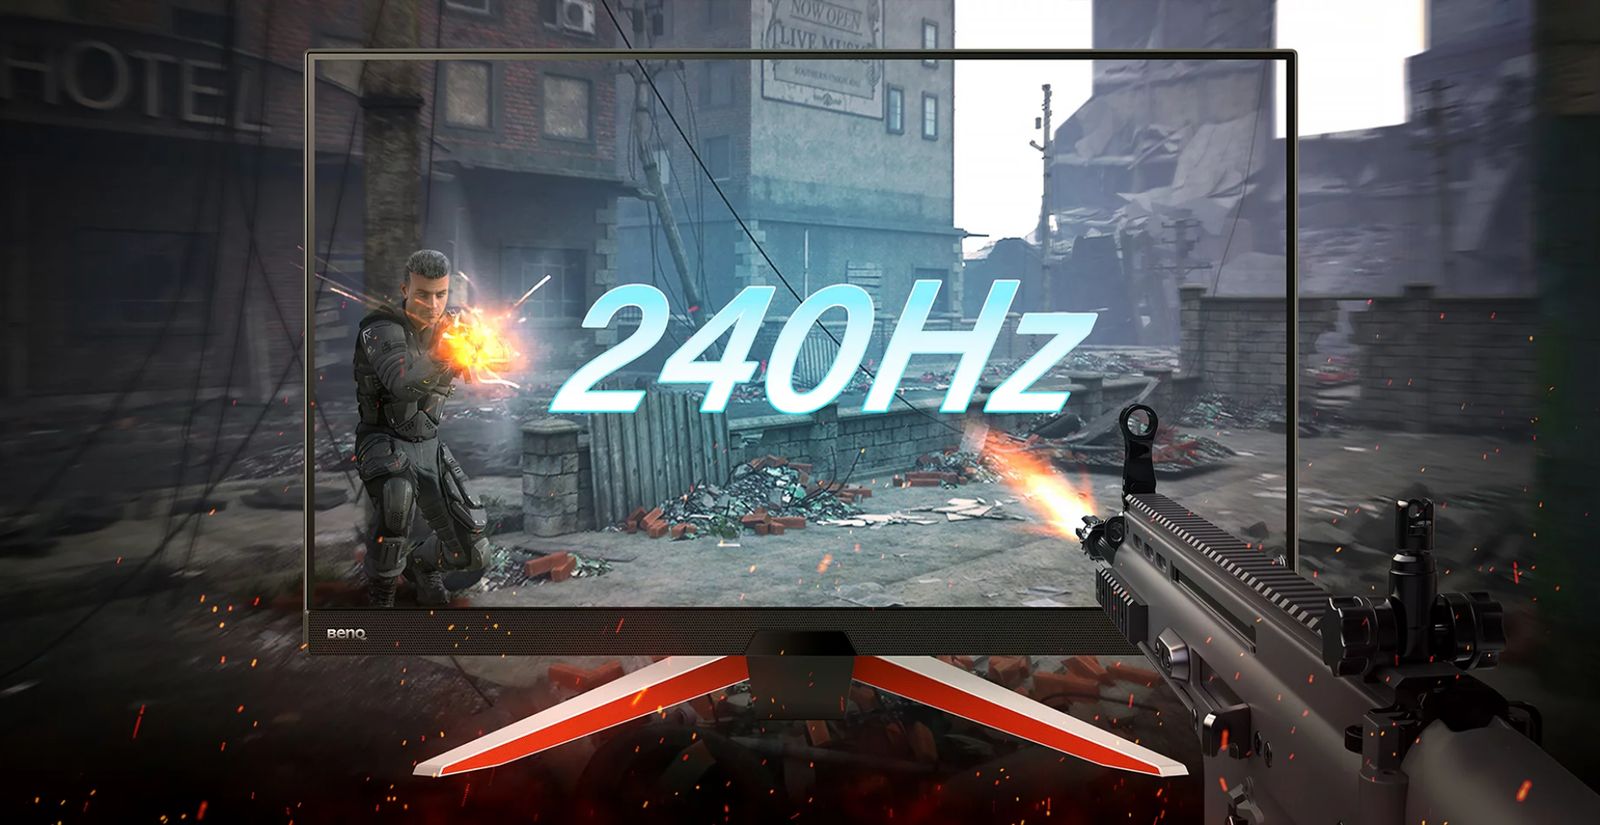 Image of a video game character firing a gun which is expanding out of a monitor with 240Hz in the centre.